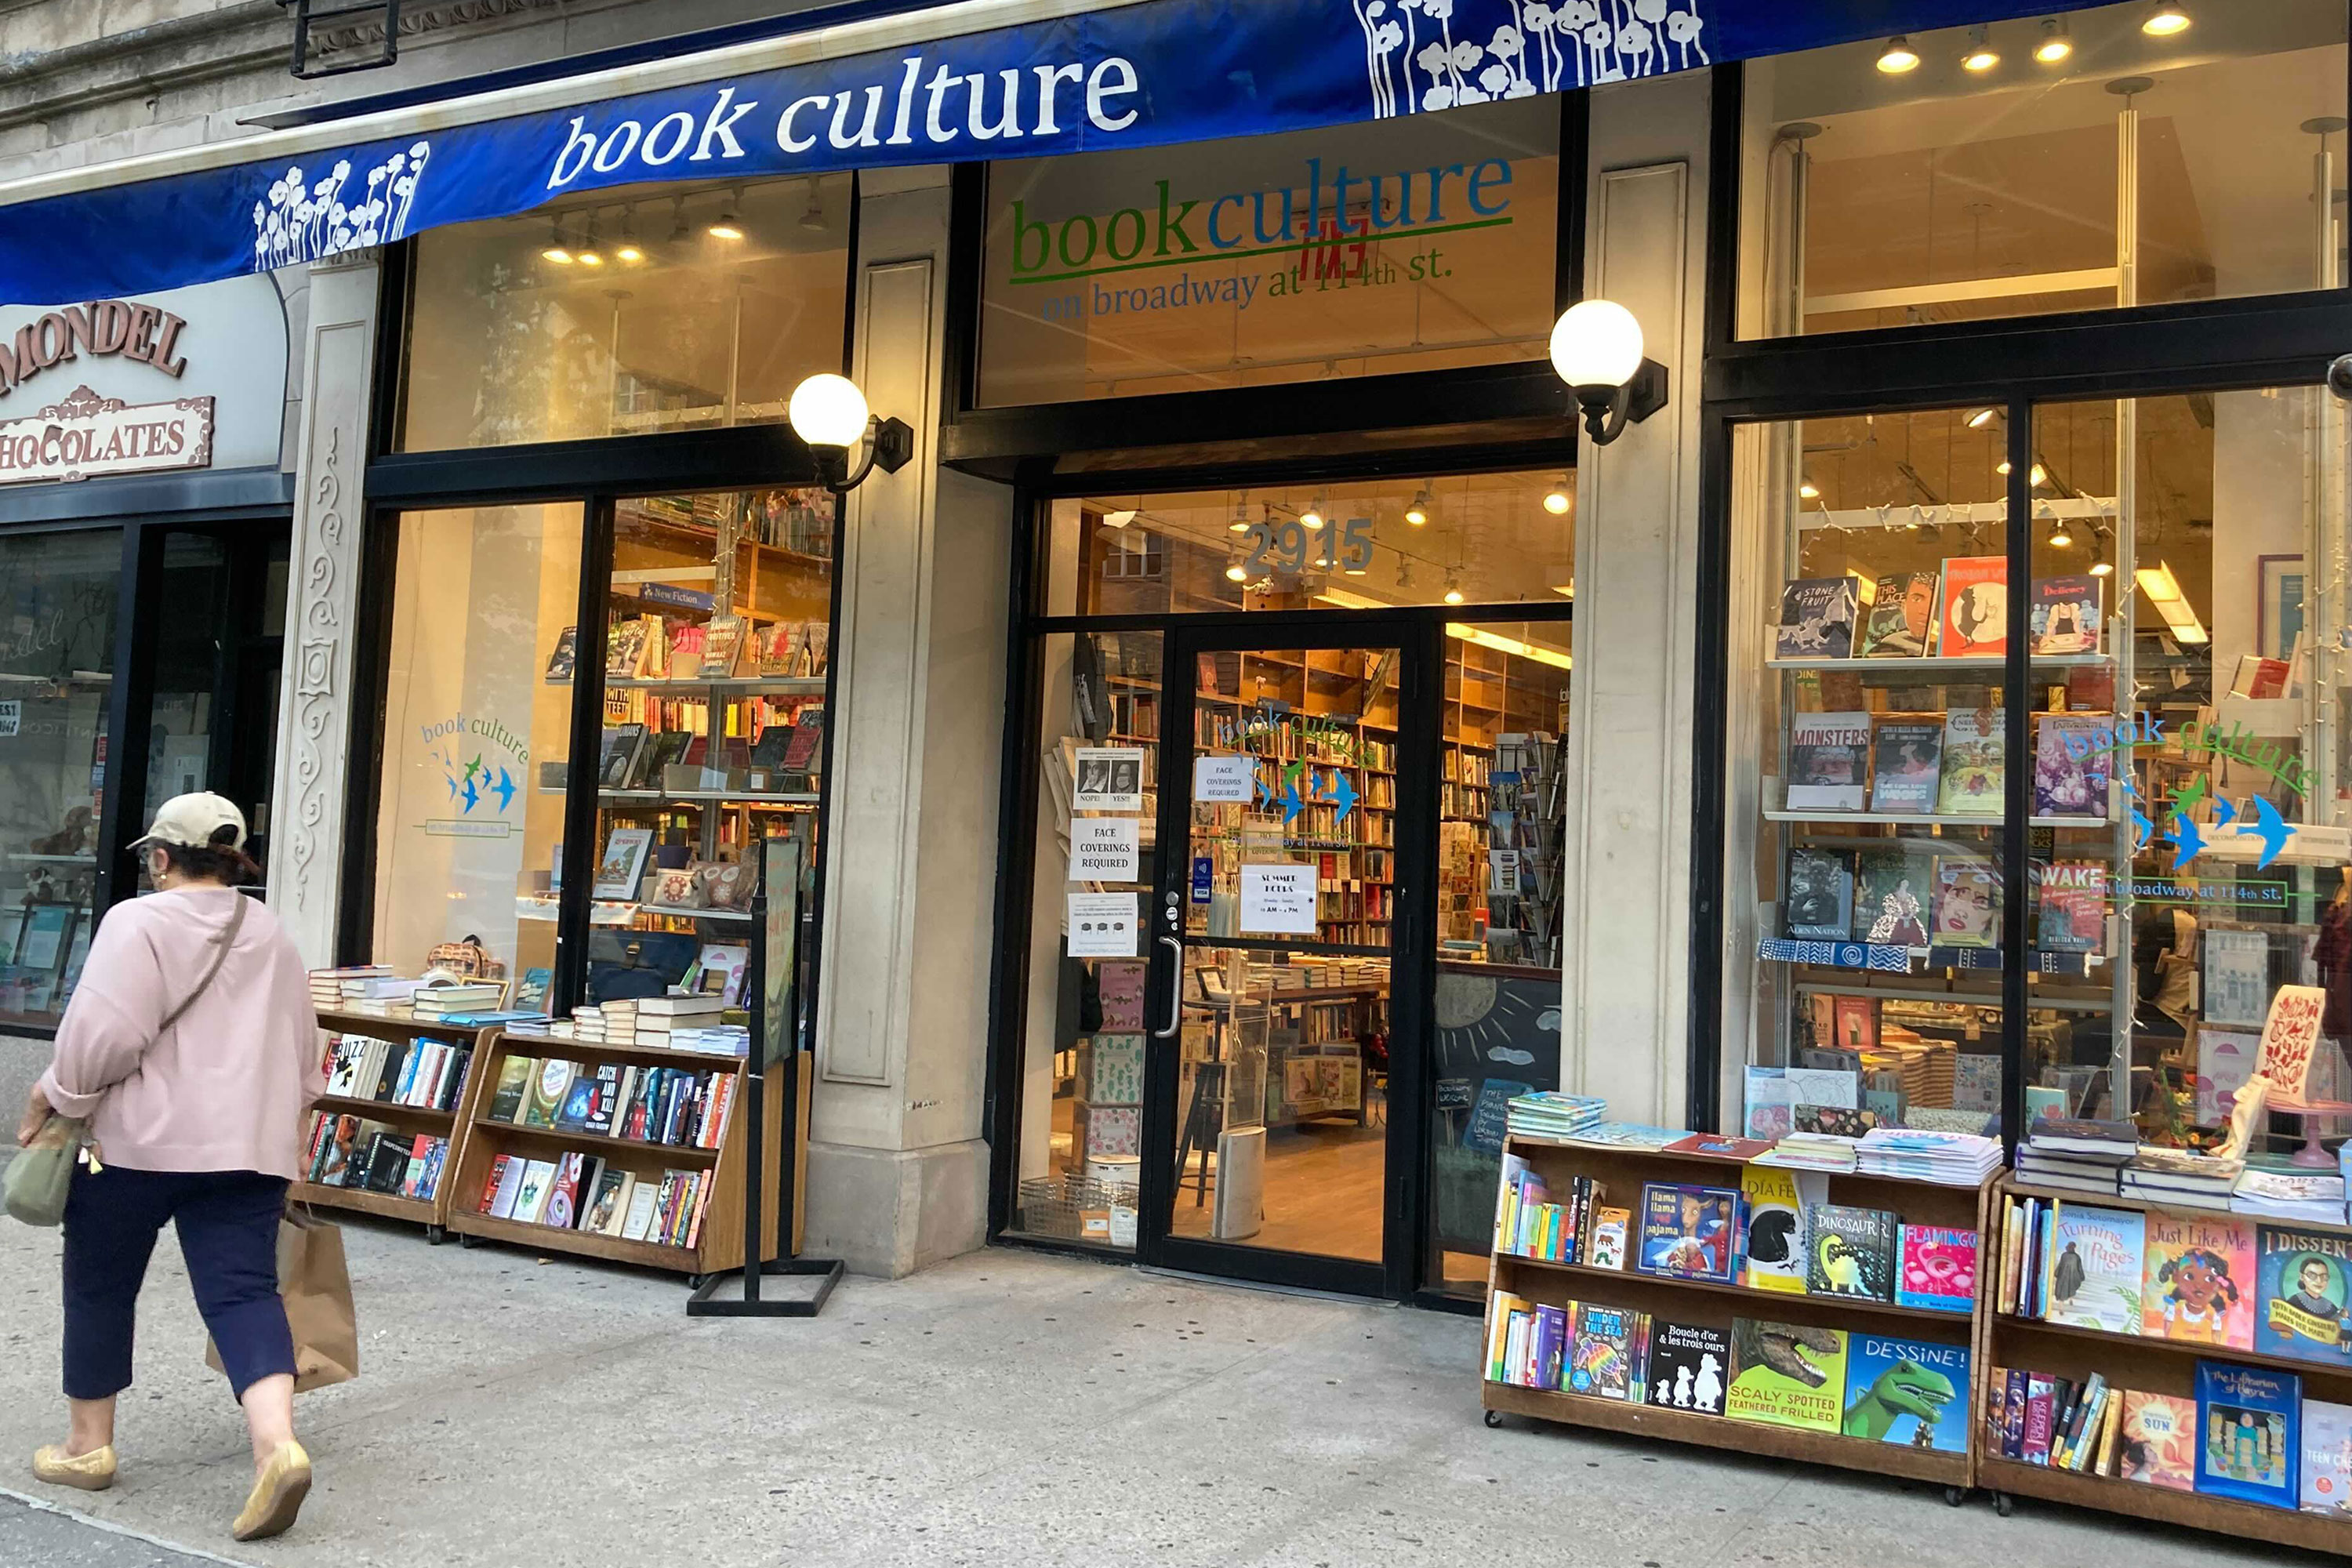 A Book Culture outpost on Broadway at W. 114th Street, near Columbia University.